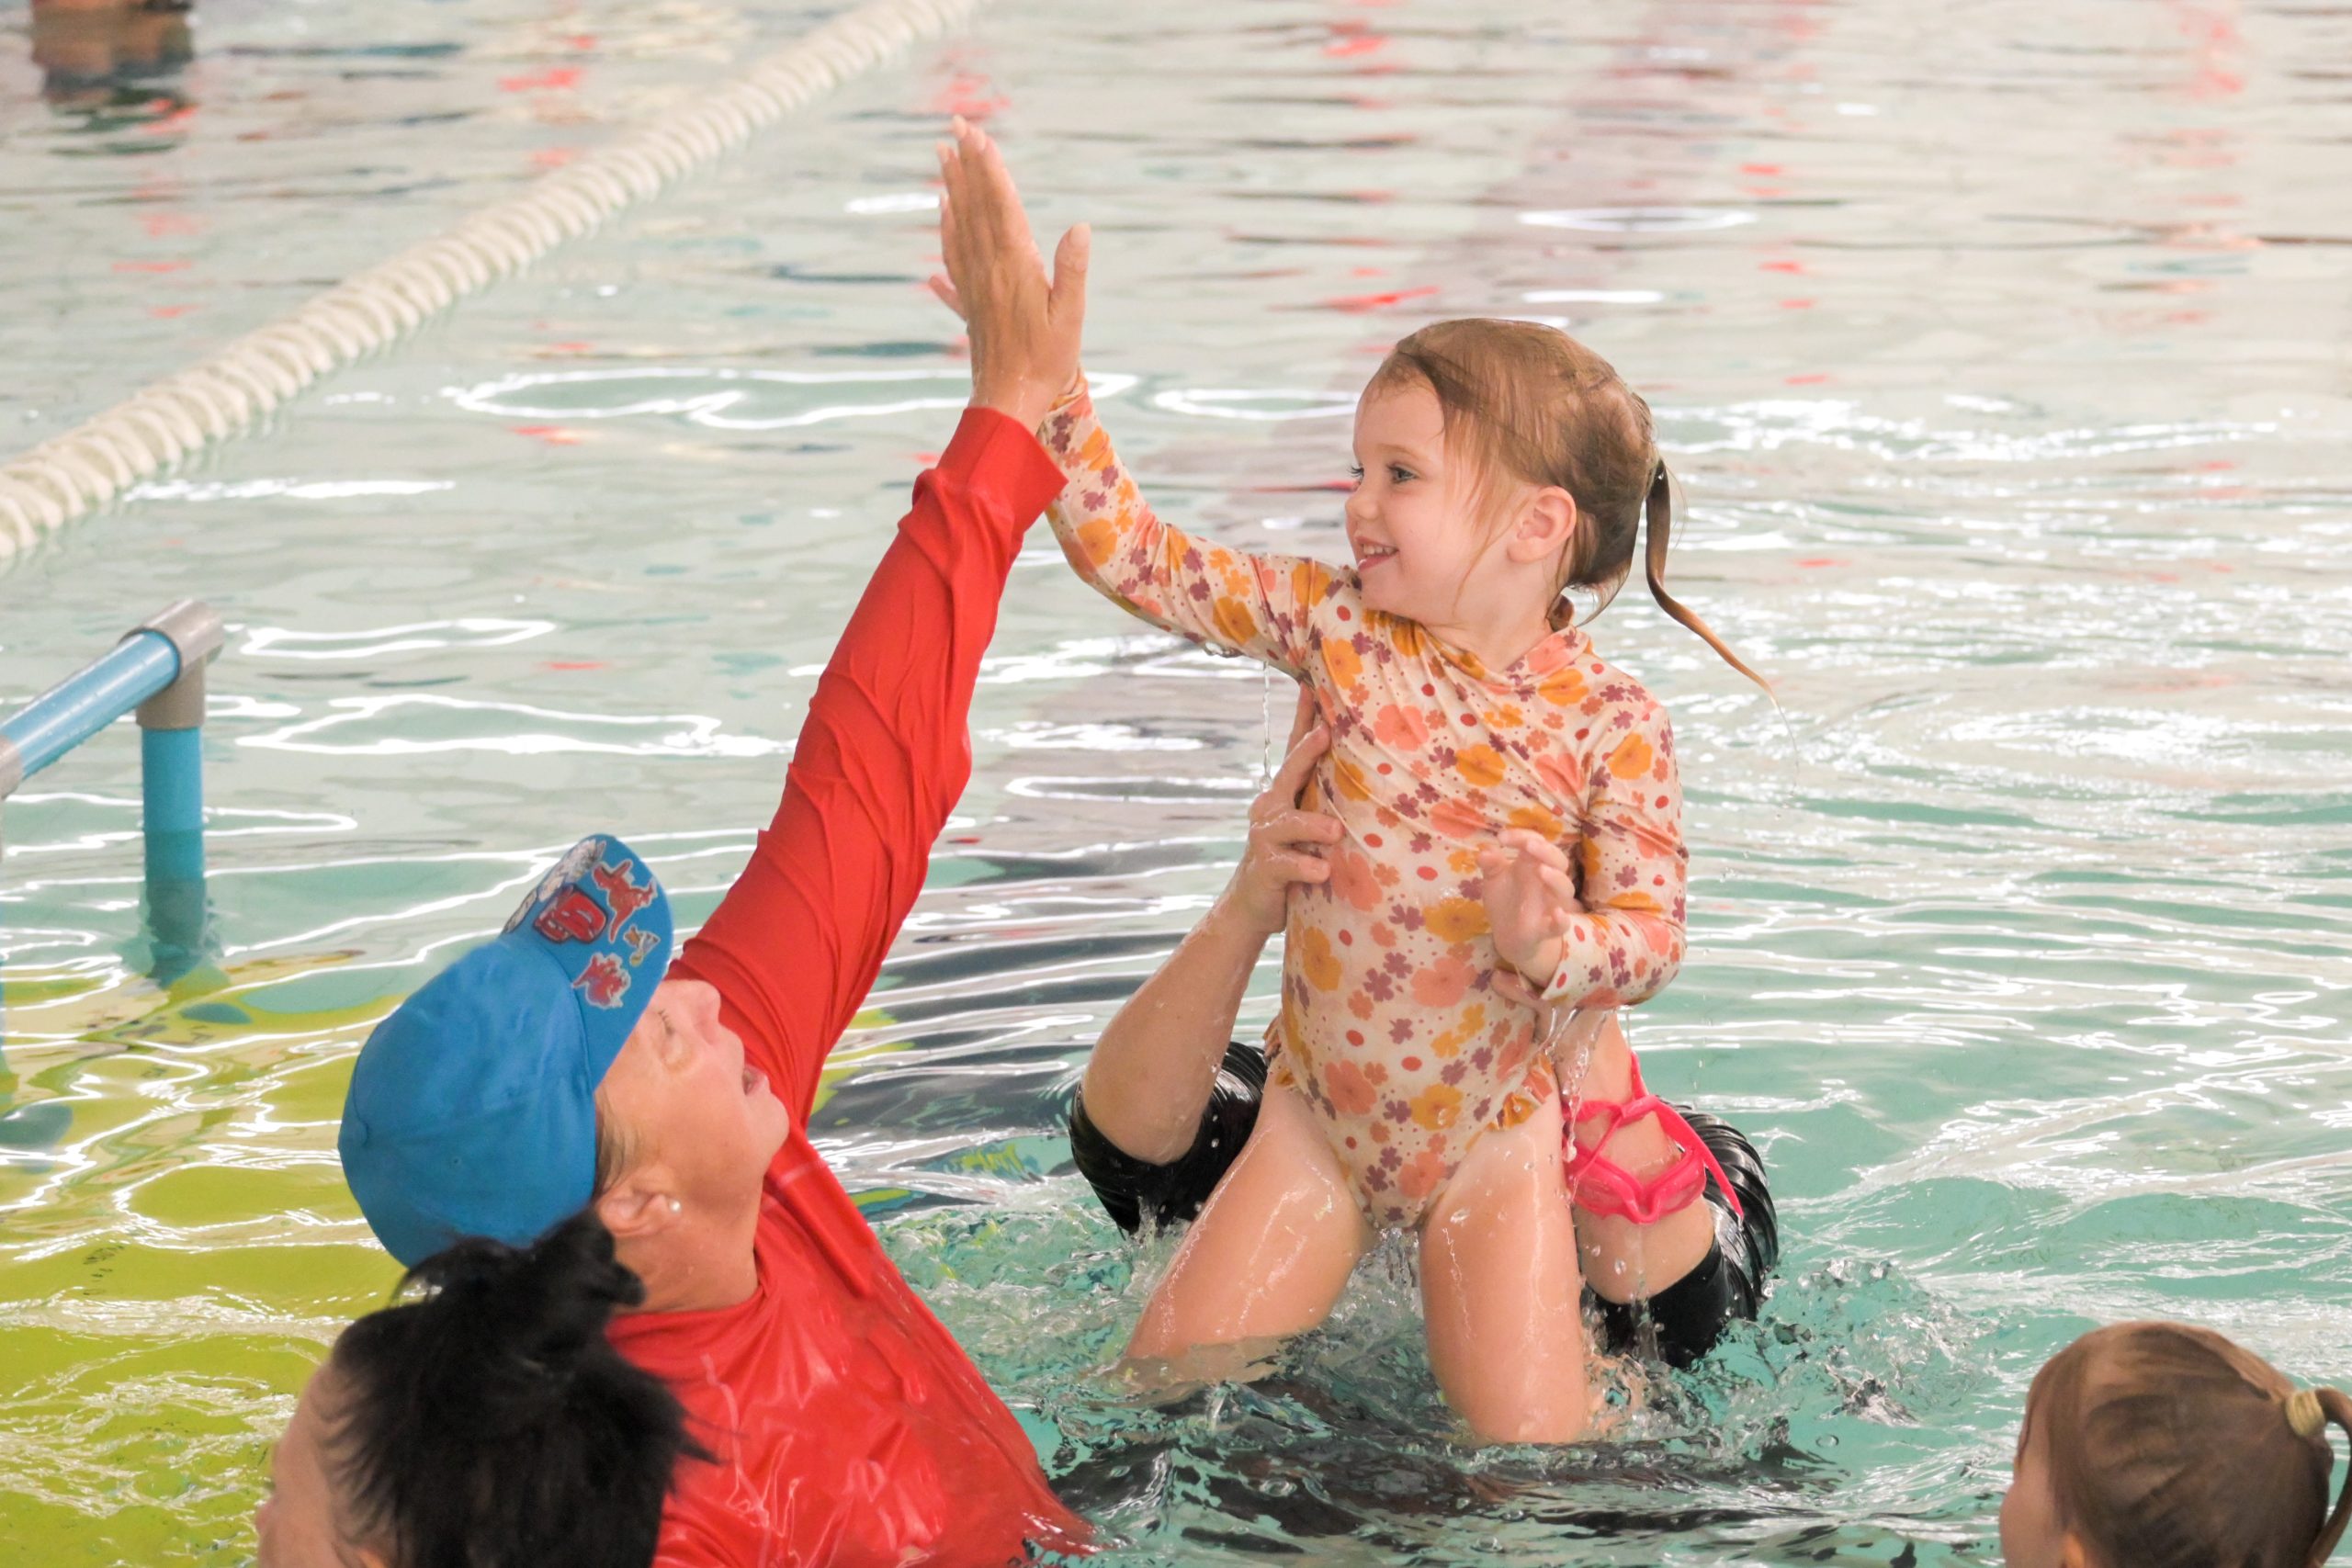 Instructor high fives young girl during swimming lesson